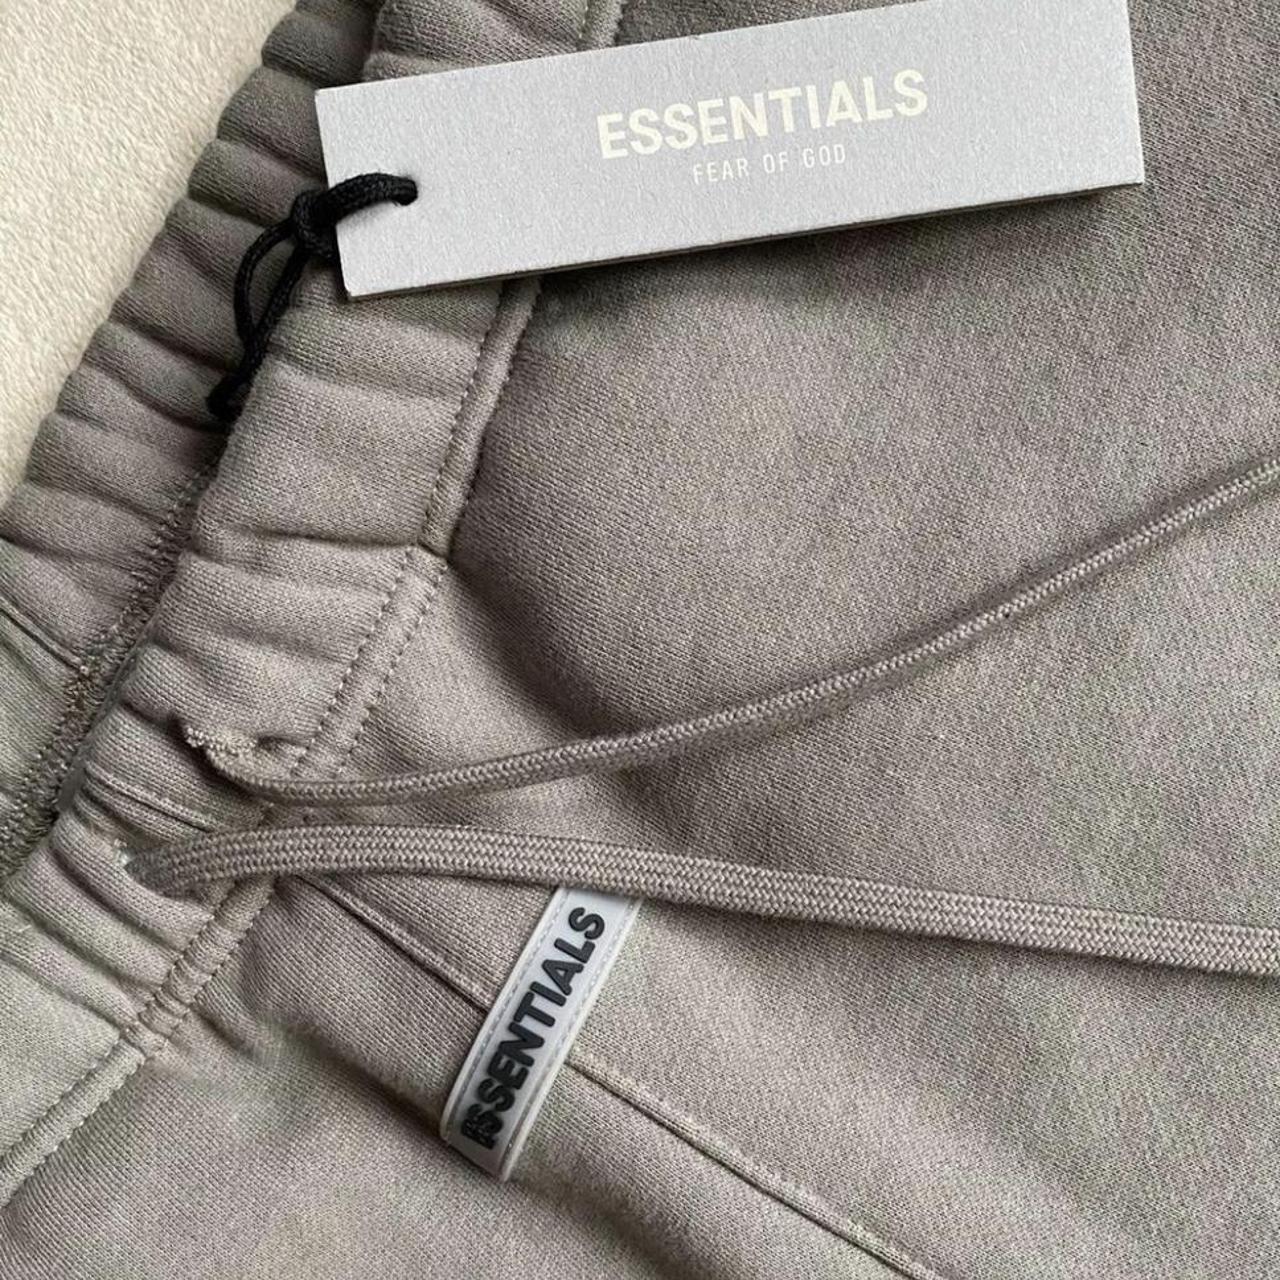 FOG Essentials FULL SETS AVAILABLE TO PRE ORDER.... - Depop